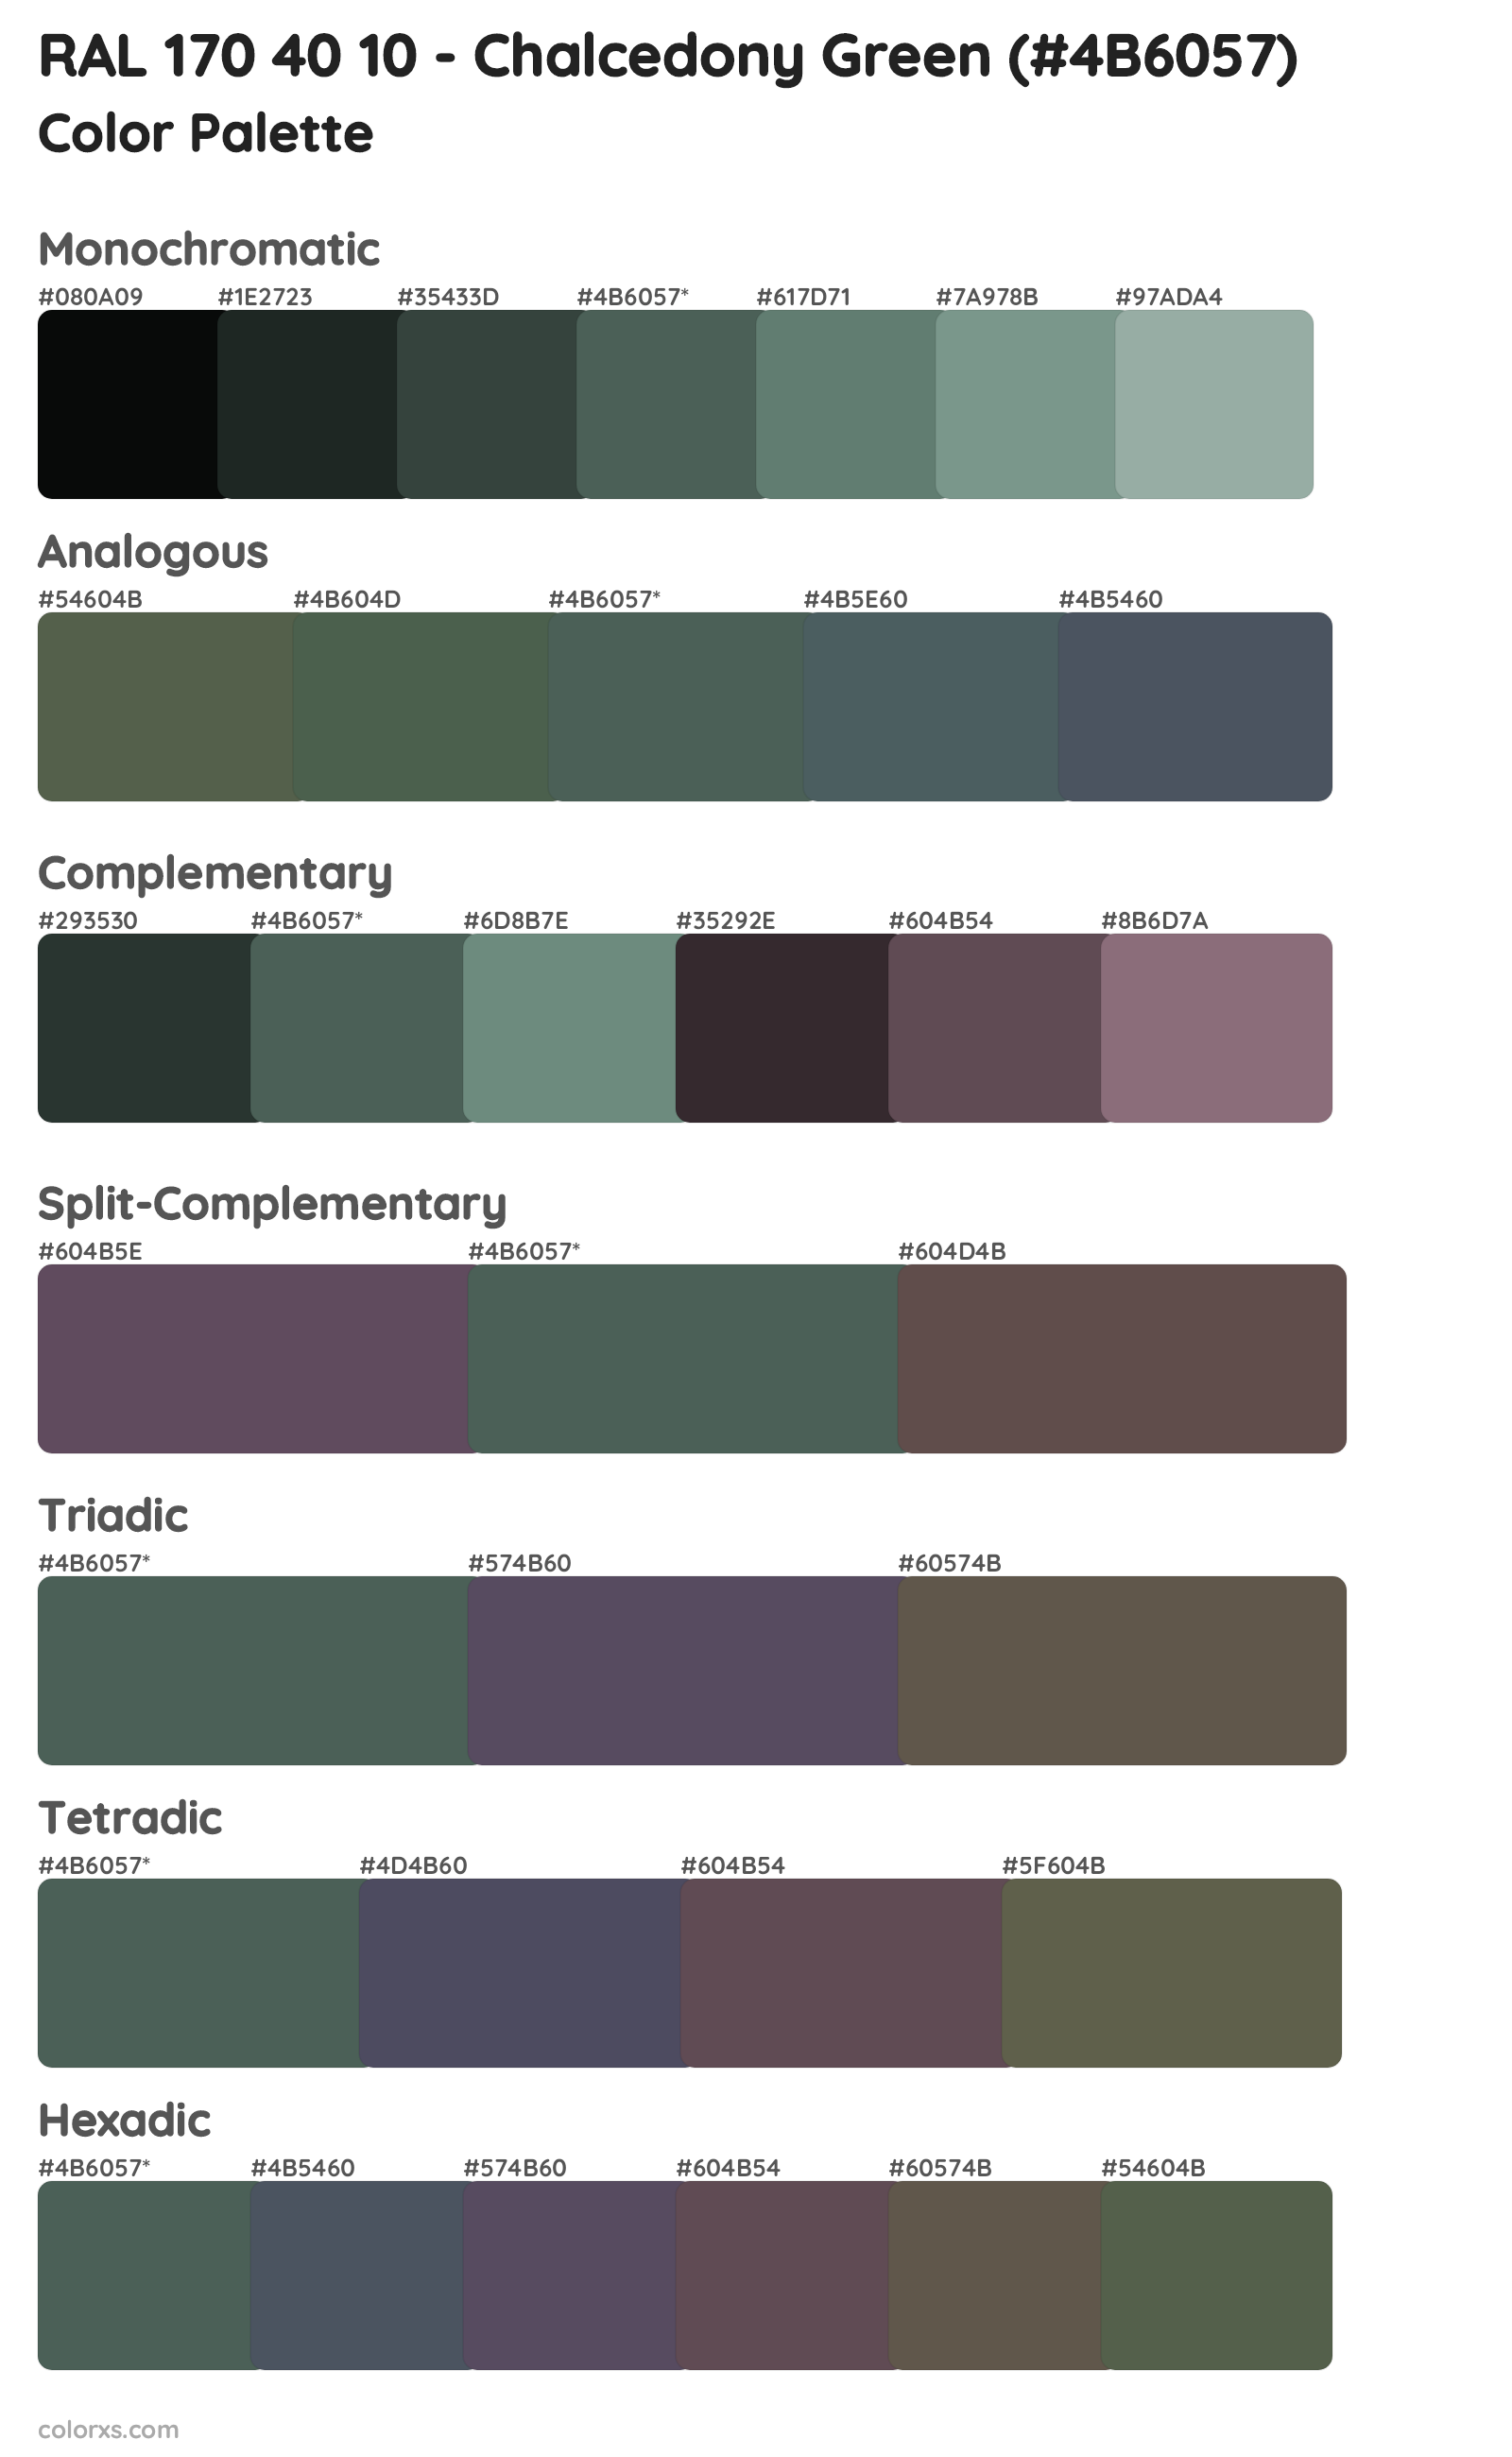 RAL 170 40 10 - Chalcedony Green Color Scheme Palettes